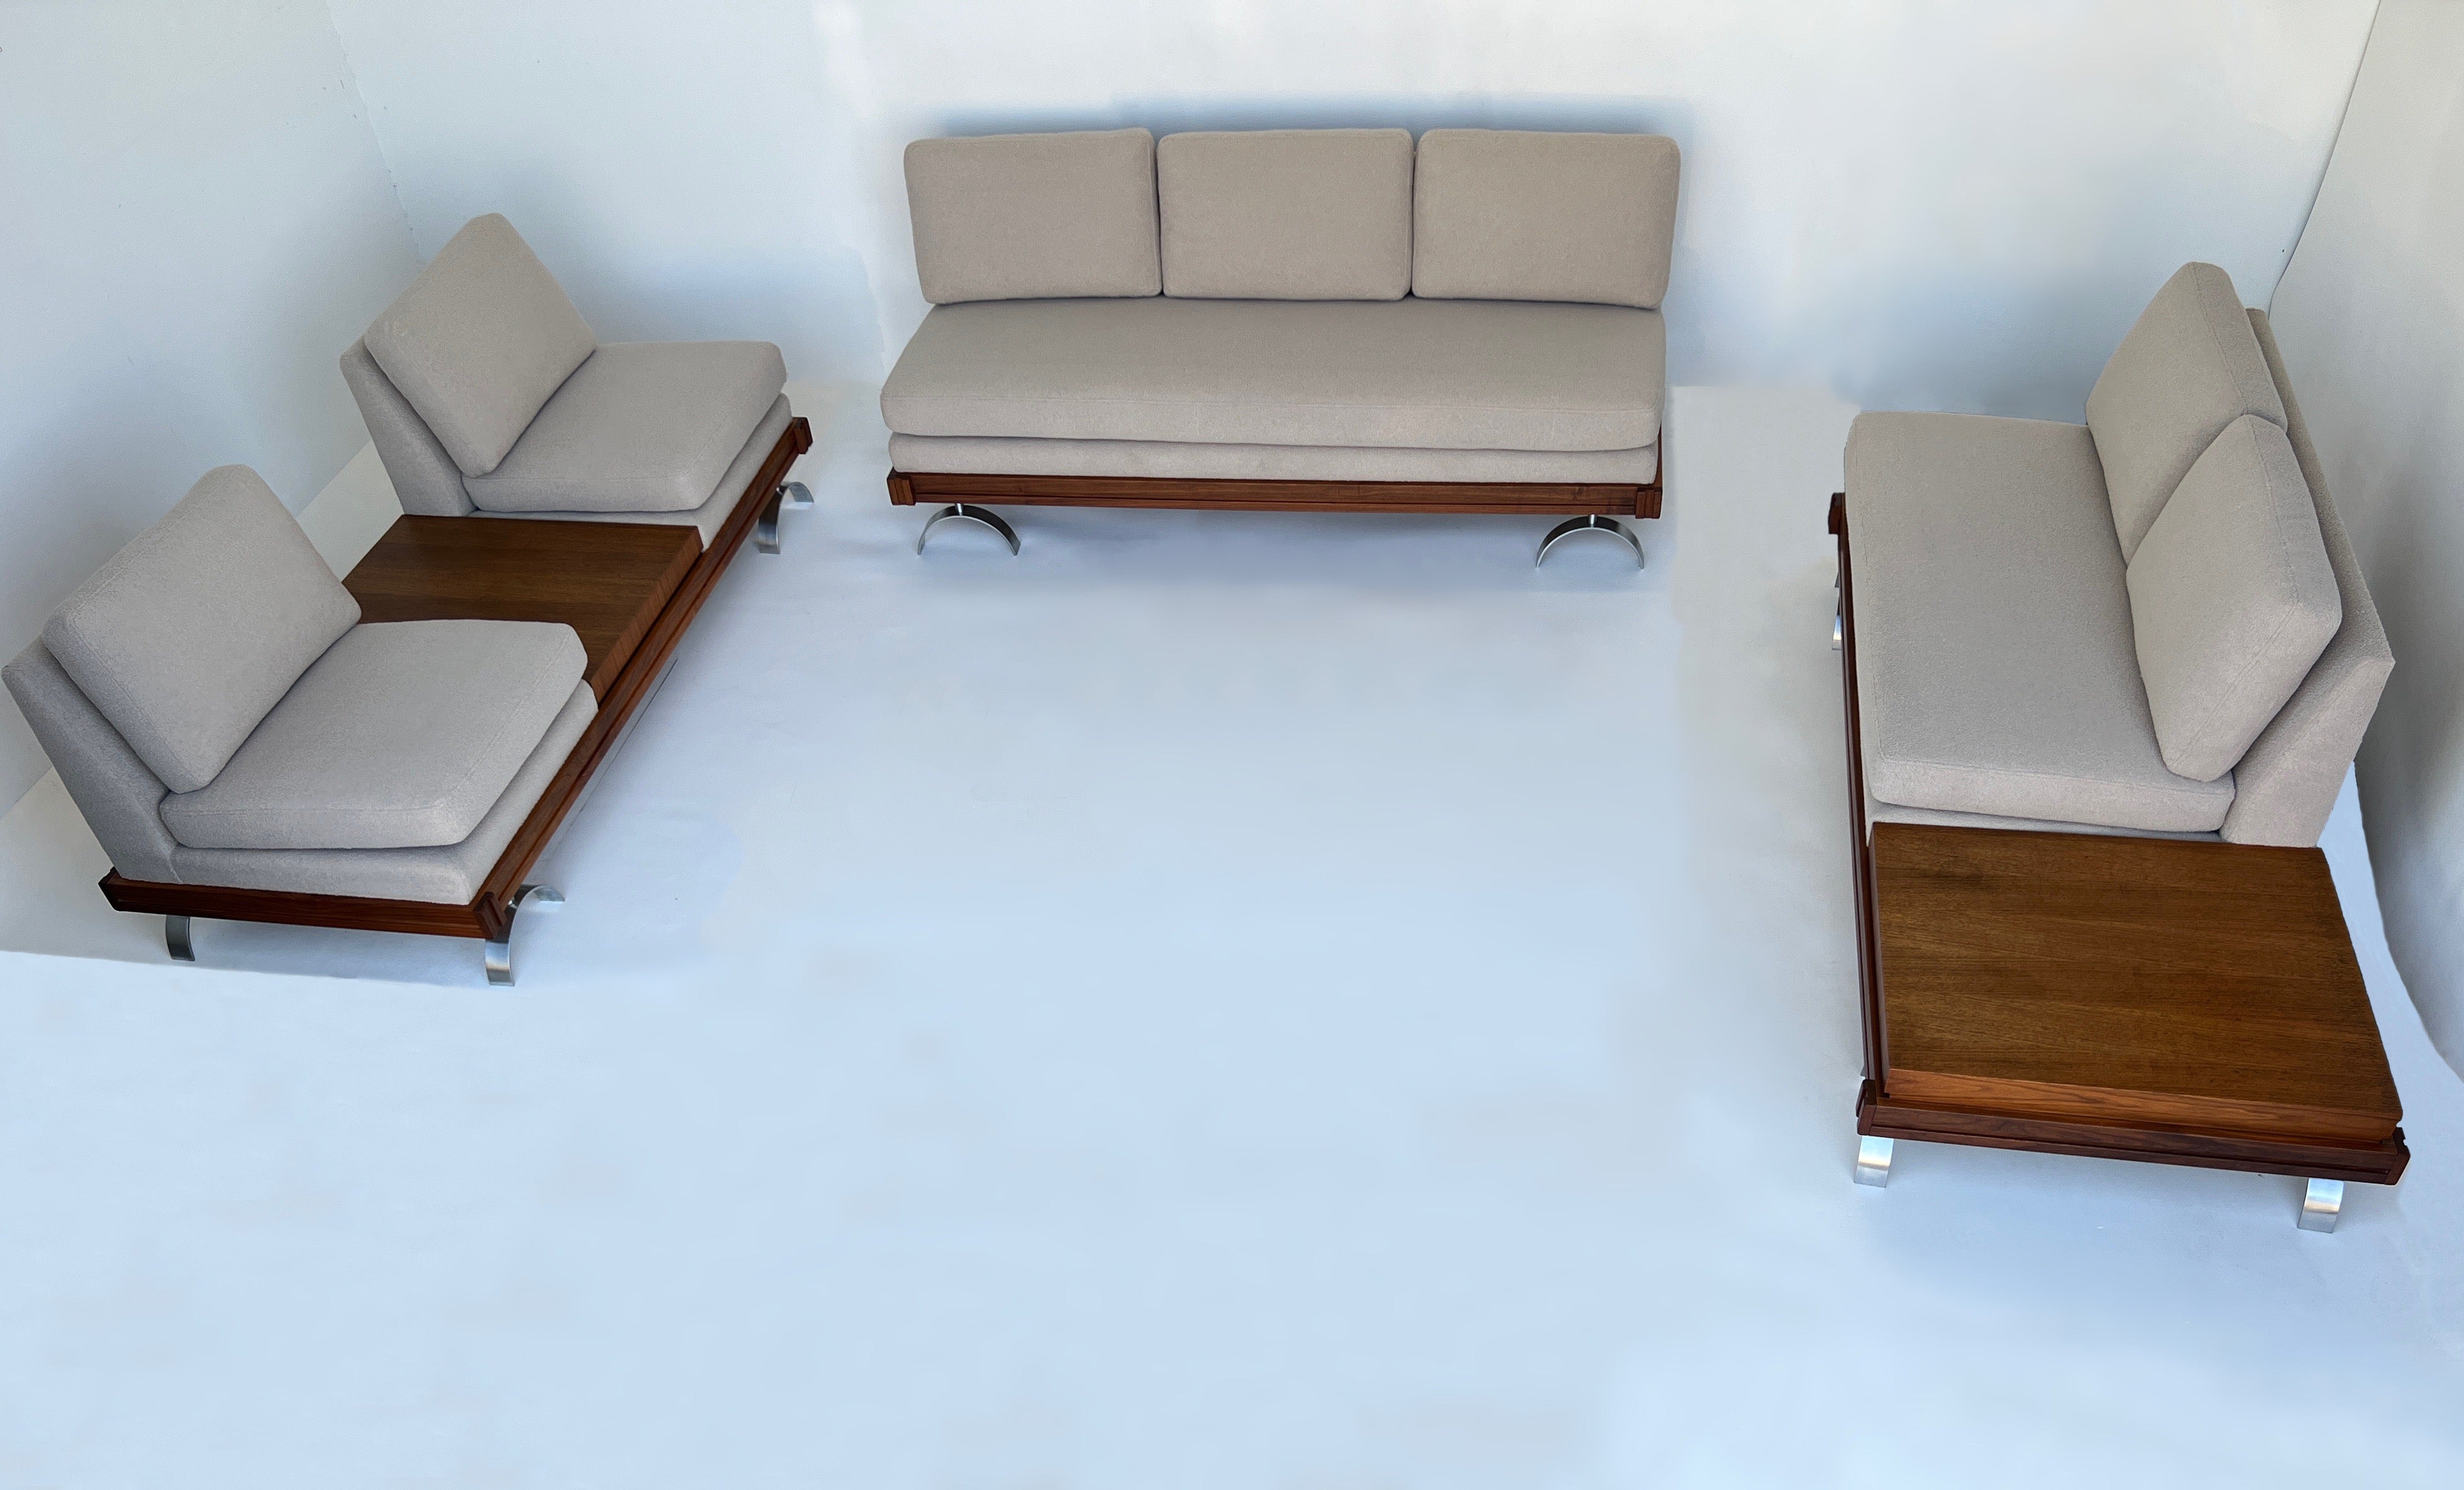 Spectacular three piece sectional sofa set designed in the 1950’s by Martin Borenstein. 
Constructed of walnut frame, stainless steel legs and newly upholstered with a soft off white boucle fabric. 
The frame is in original condition, shows minor